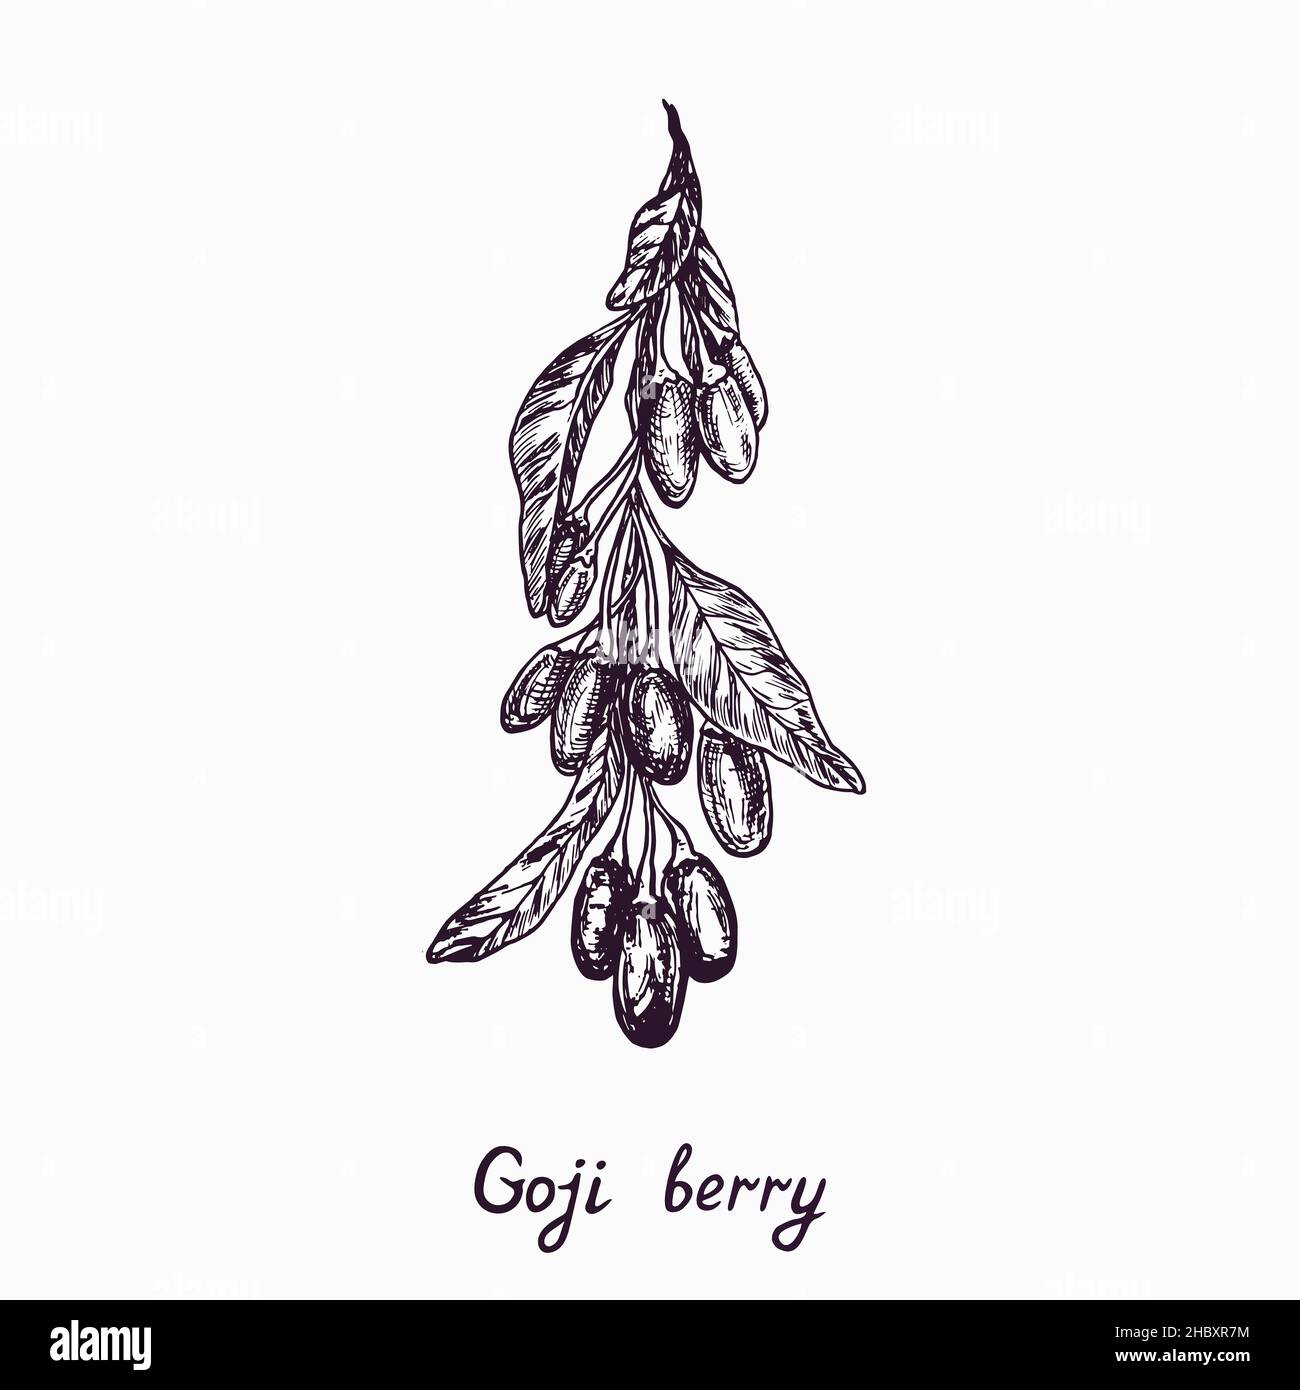 Goji berry branch with berries and leaves, simple doodle drawing with inscription, gravure style Stock Photo